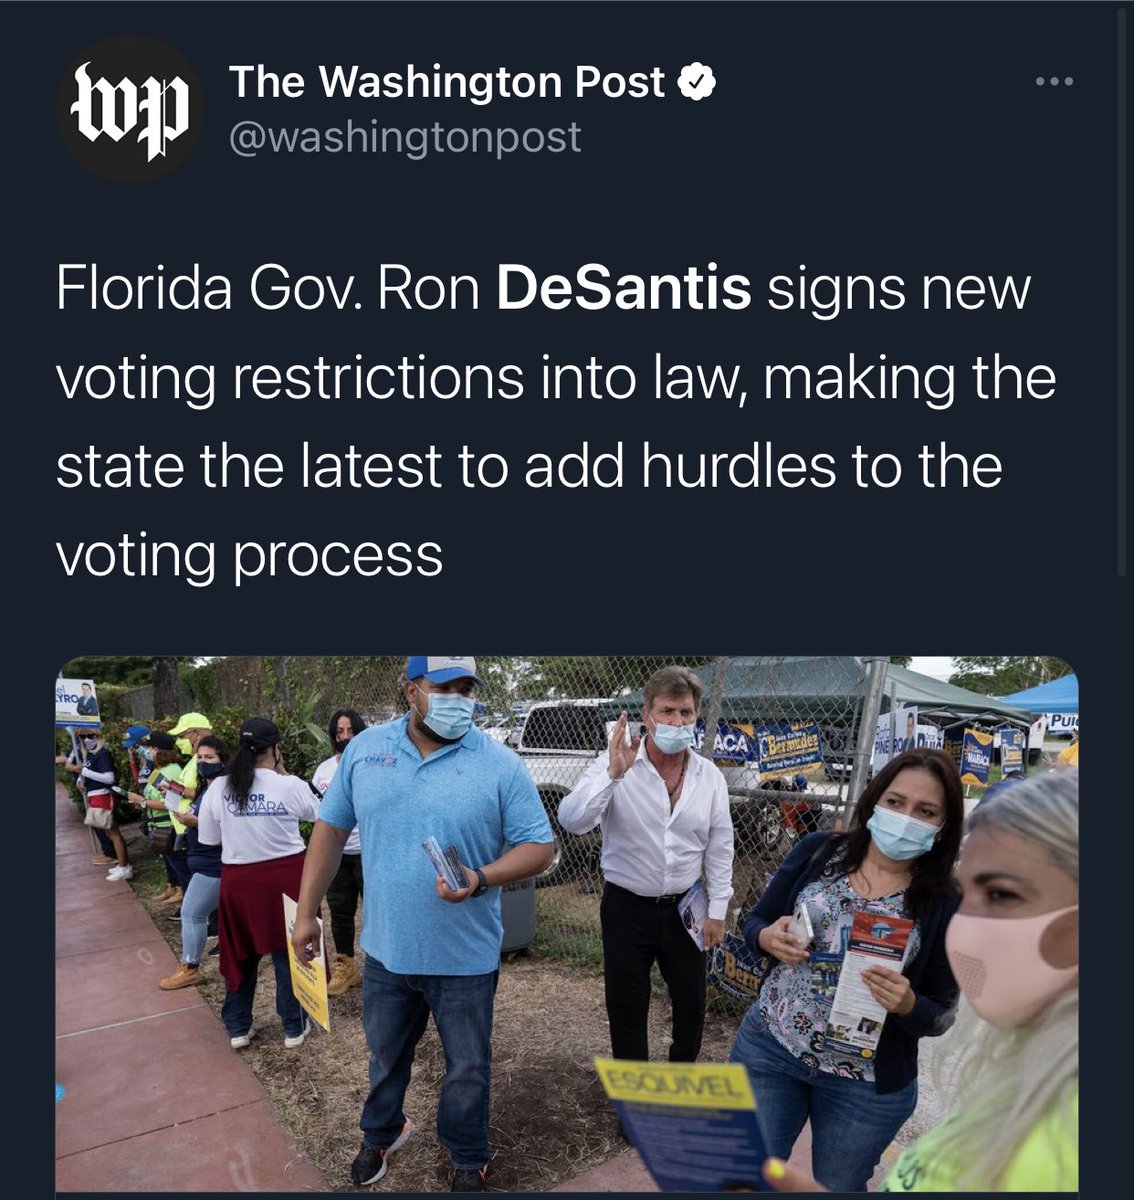 Here we go again. Before you write a story about the Florida law’s “sweeping restrictions” or “reducing voter access” please take a look at the specifics of the bill. Democrats want to make basic safeguards that have existed for decades toxic. Don’t help them gaslight.